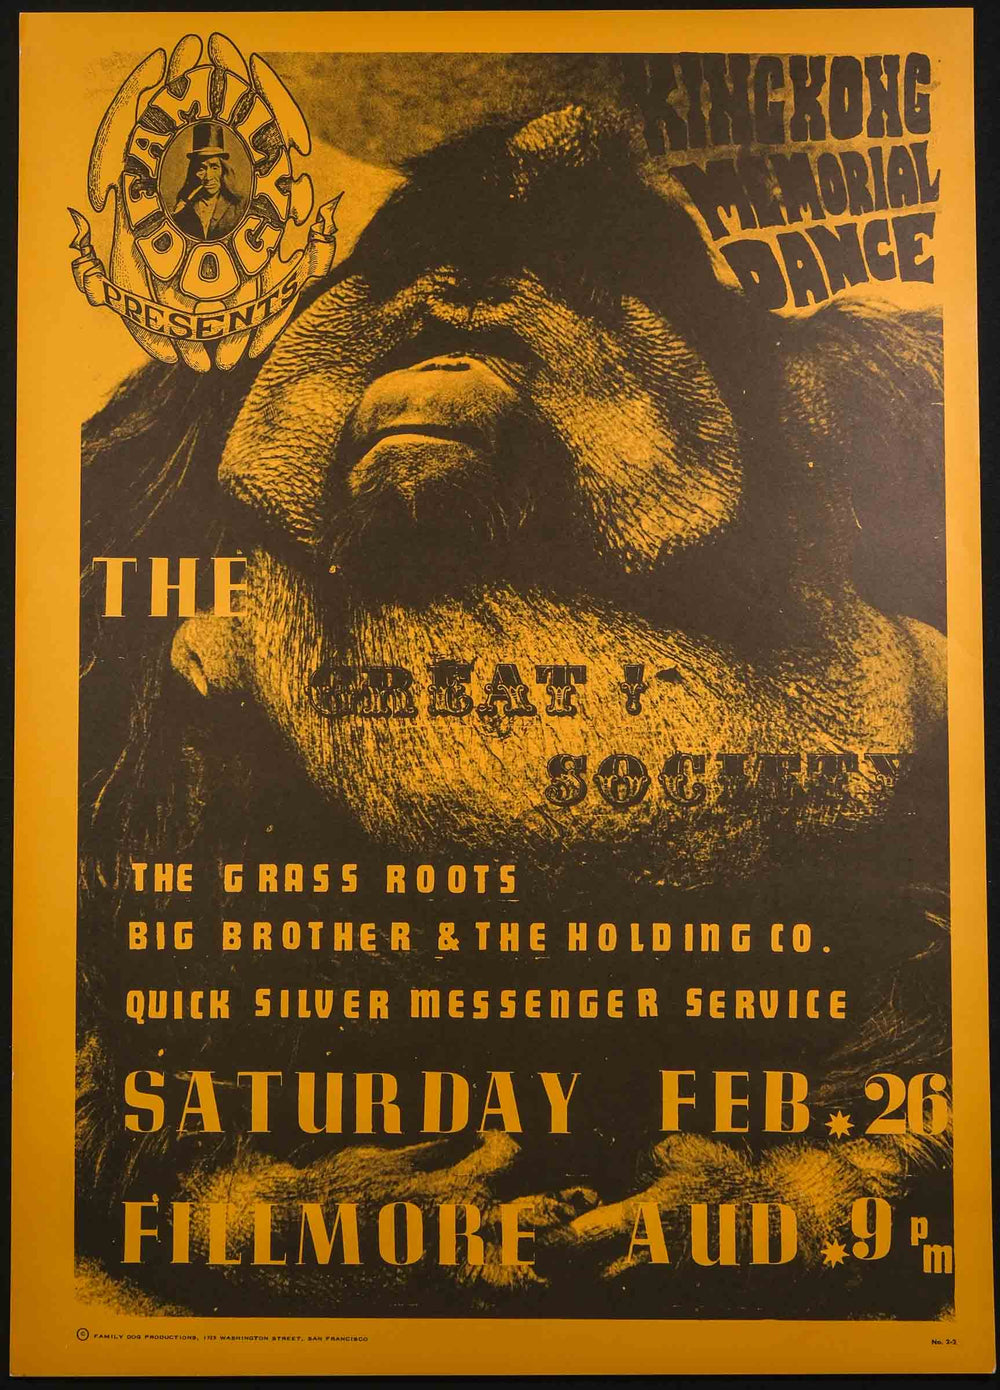 wes wilson RareDeadConcertPoster with monkey in background